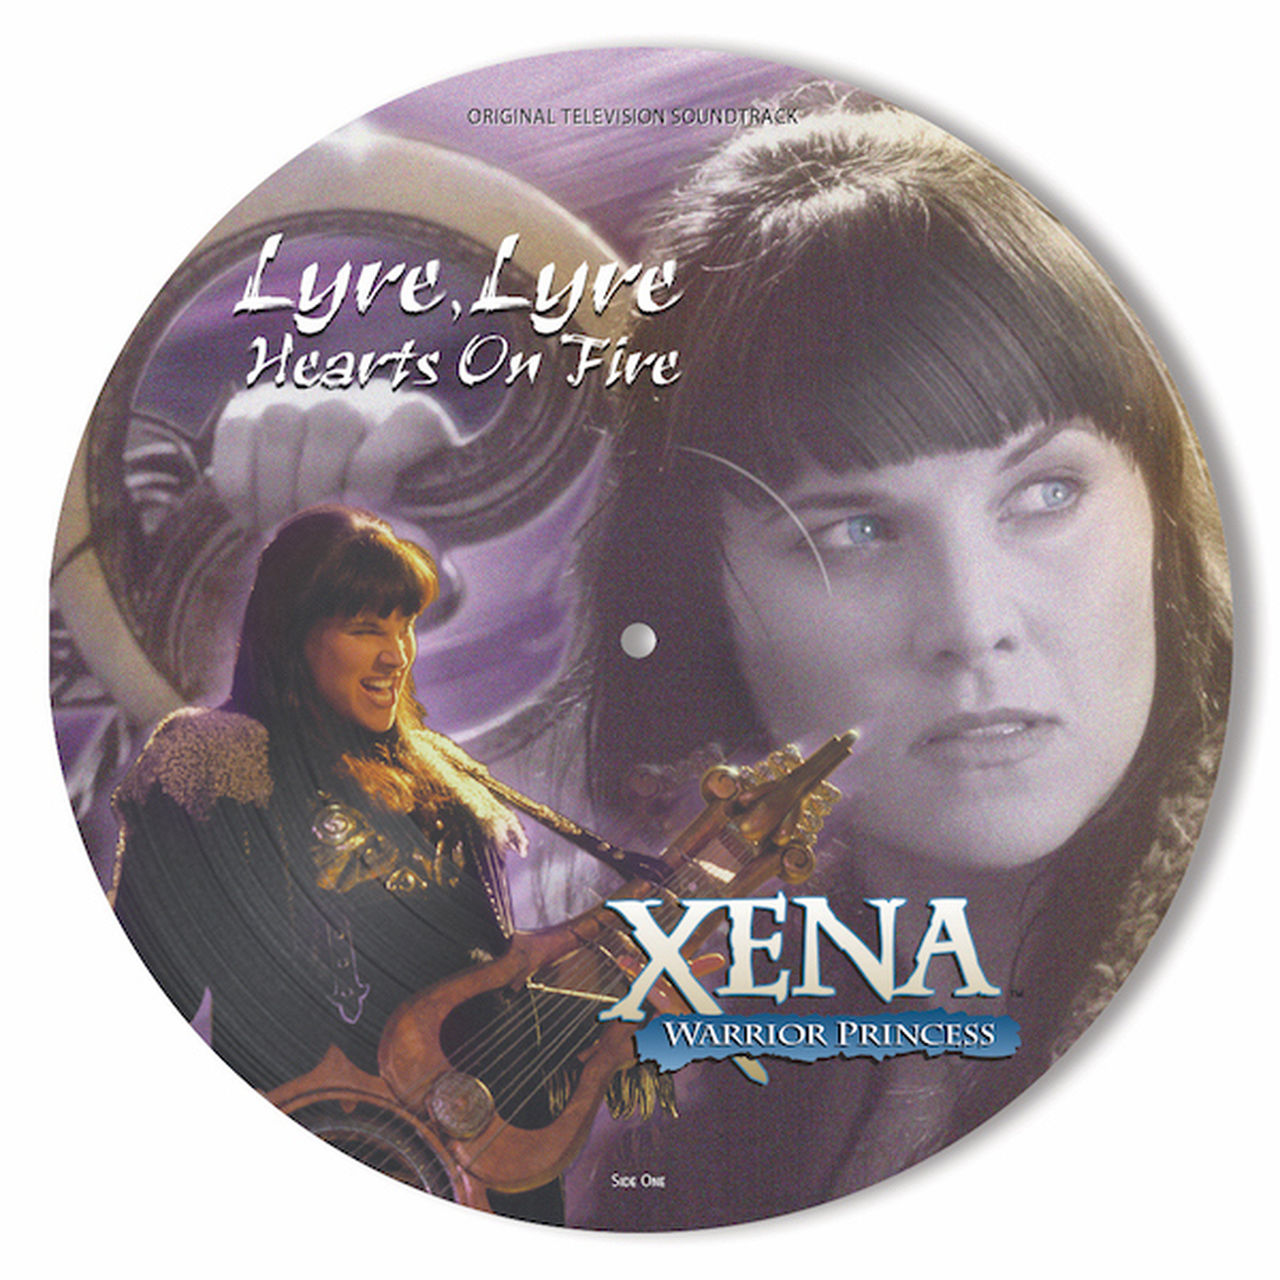 Xena: Warrior Princess - Lyre, Lyre Hearts On Fire: Limited Edition Picture Disc